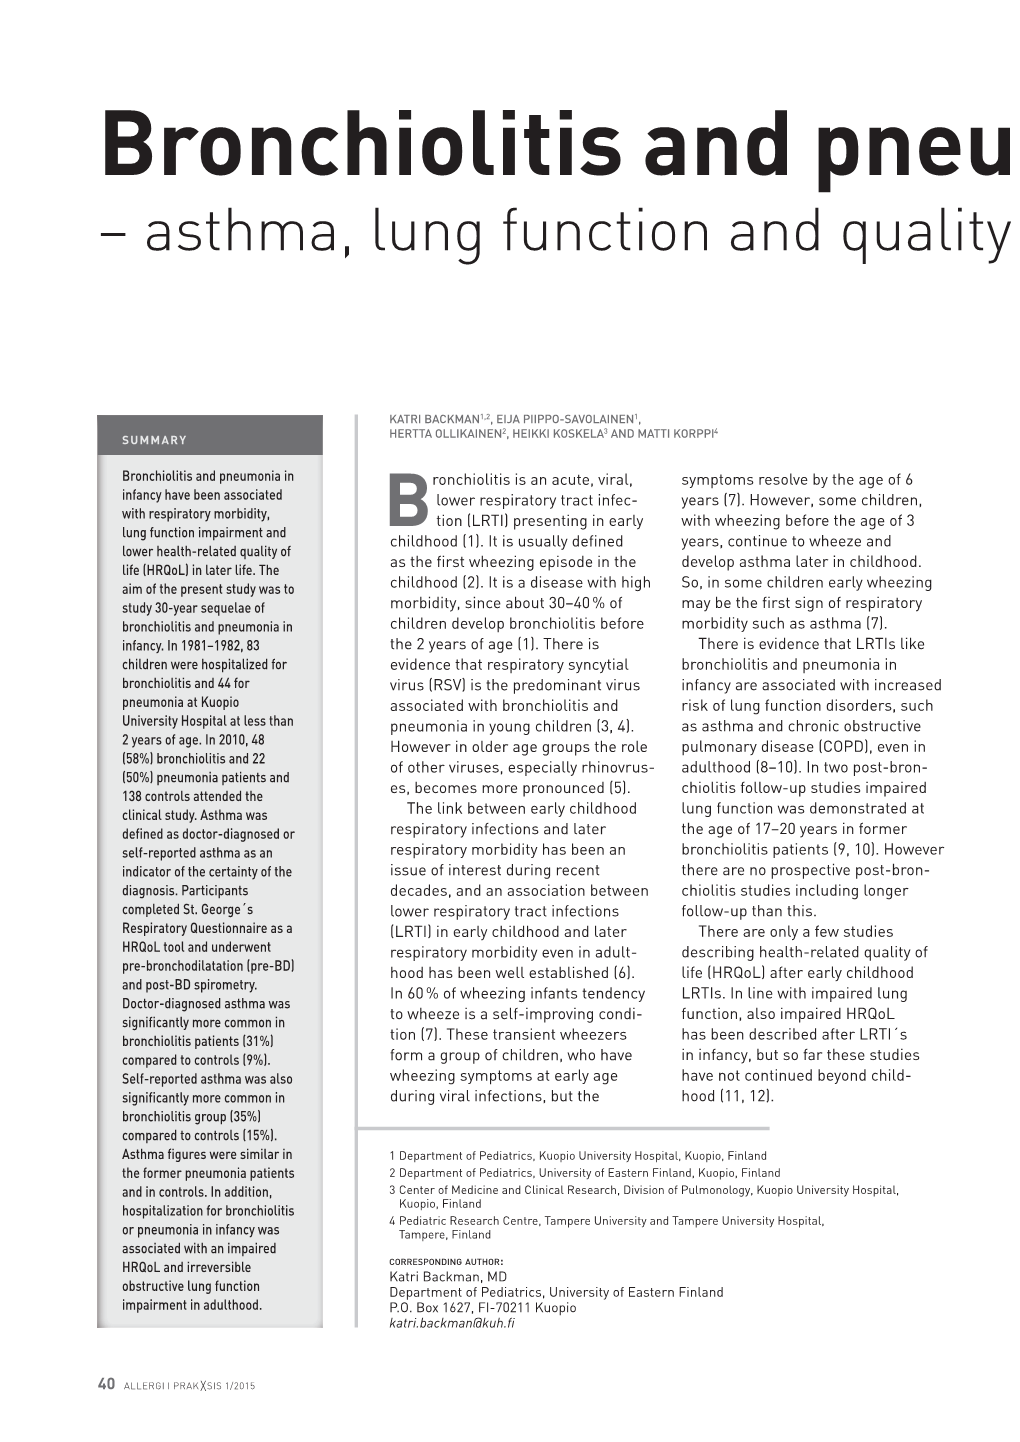 Bronchiolitis and Pneumonia in Infancy – Asthma, Lung Function and Quality of Life at a 30-Year Follow-Up